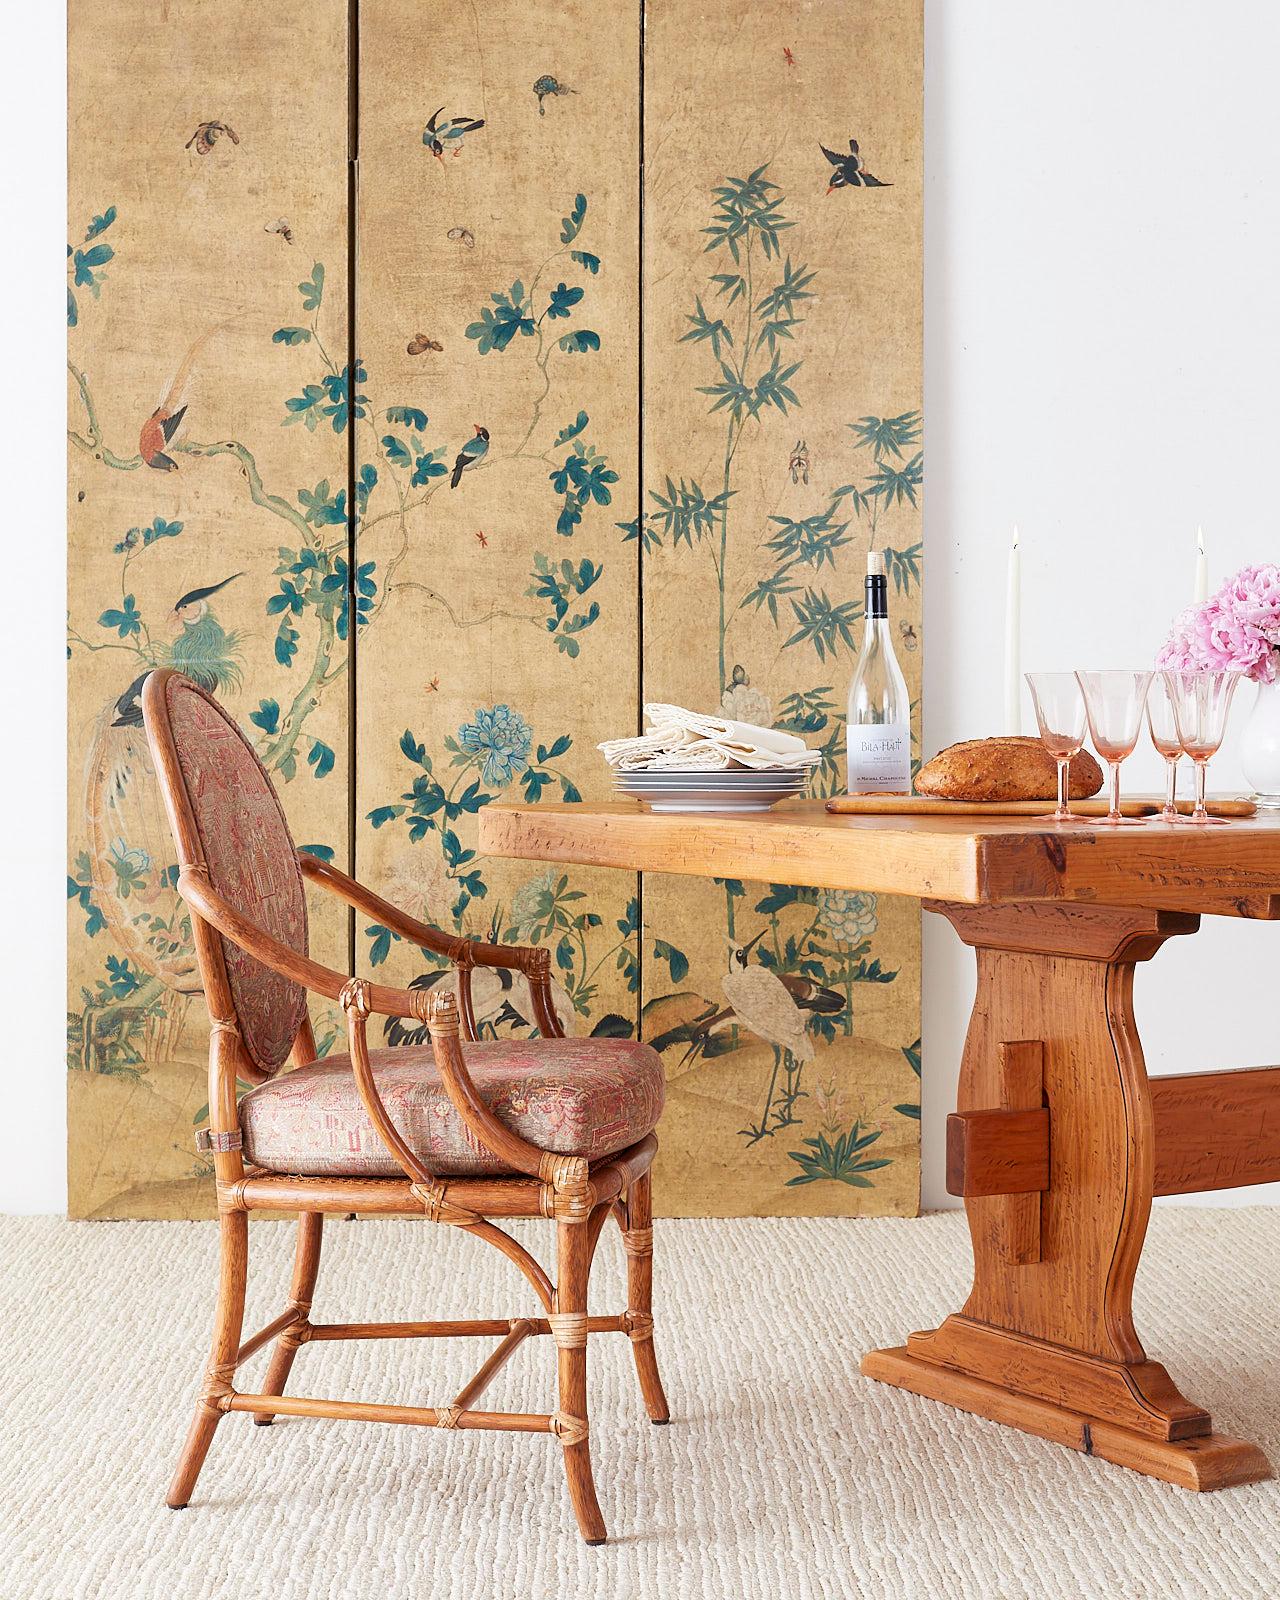 Fascinating continental chinoiserie painted wallpaper screen depicting flora and fauna. Beautifully decorated with birds and trees on one side with a light background. The reverse side is embellished with decoupage birds in bright colors over a dark